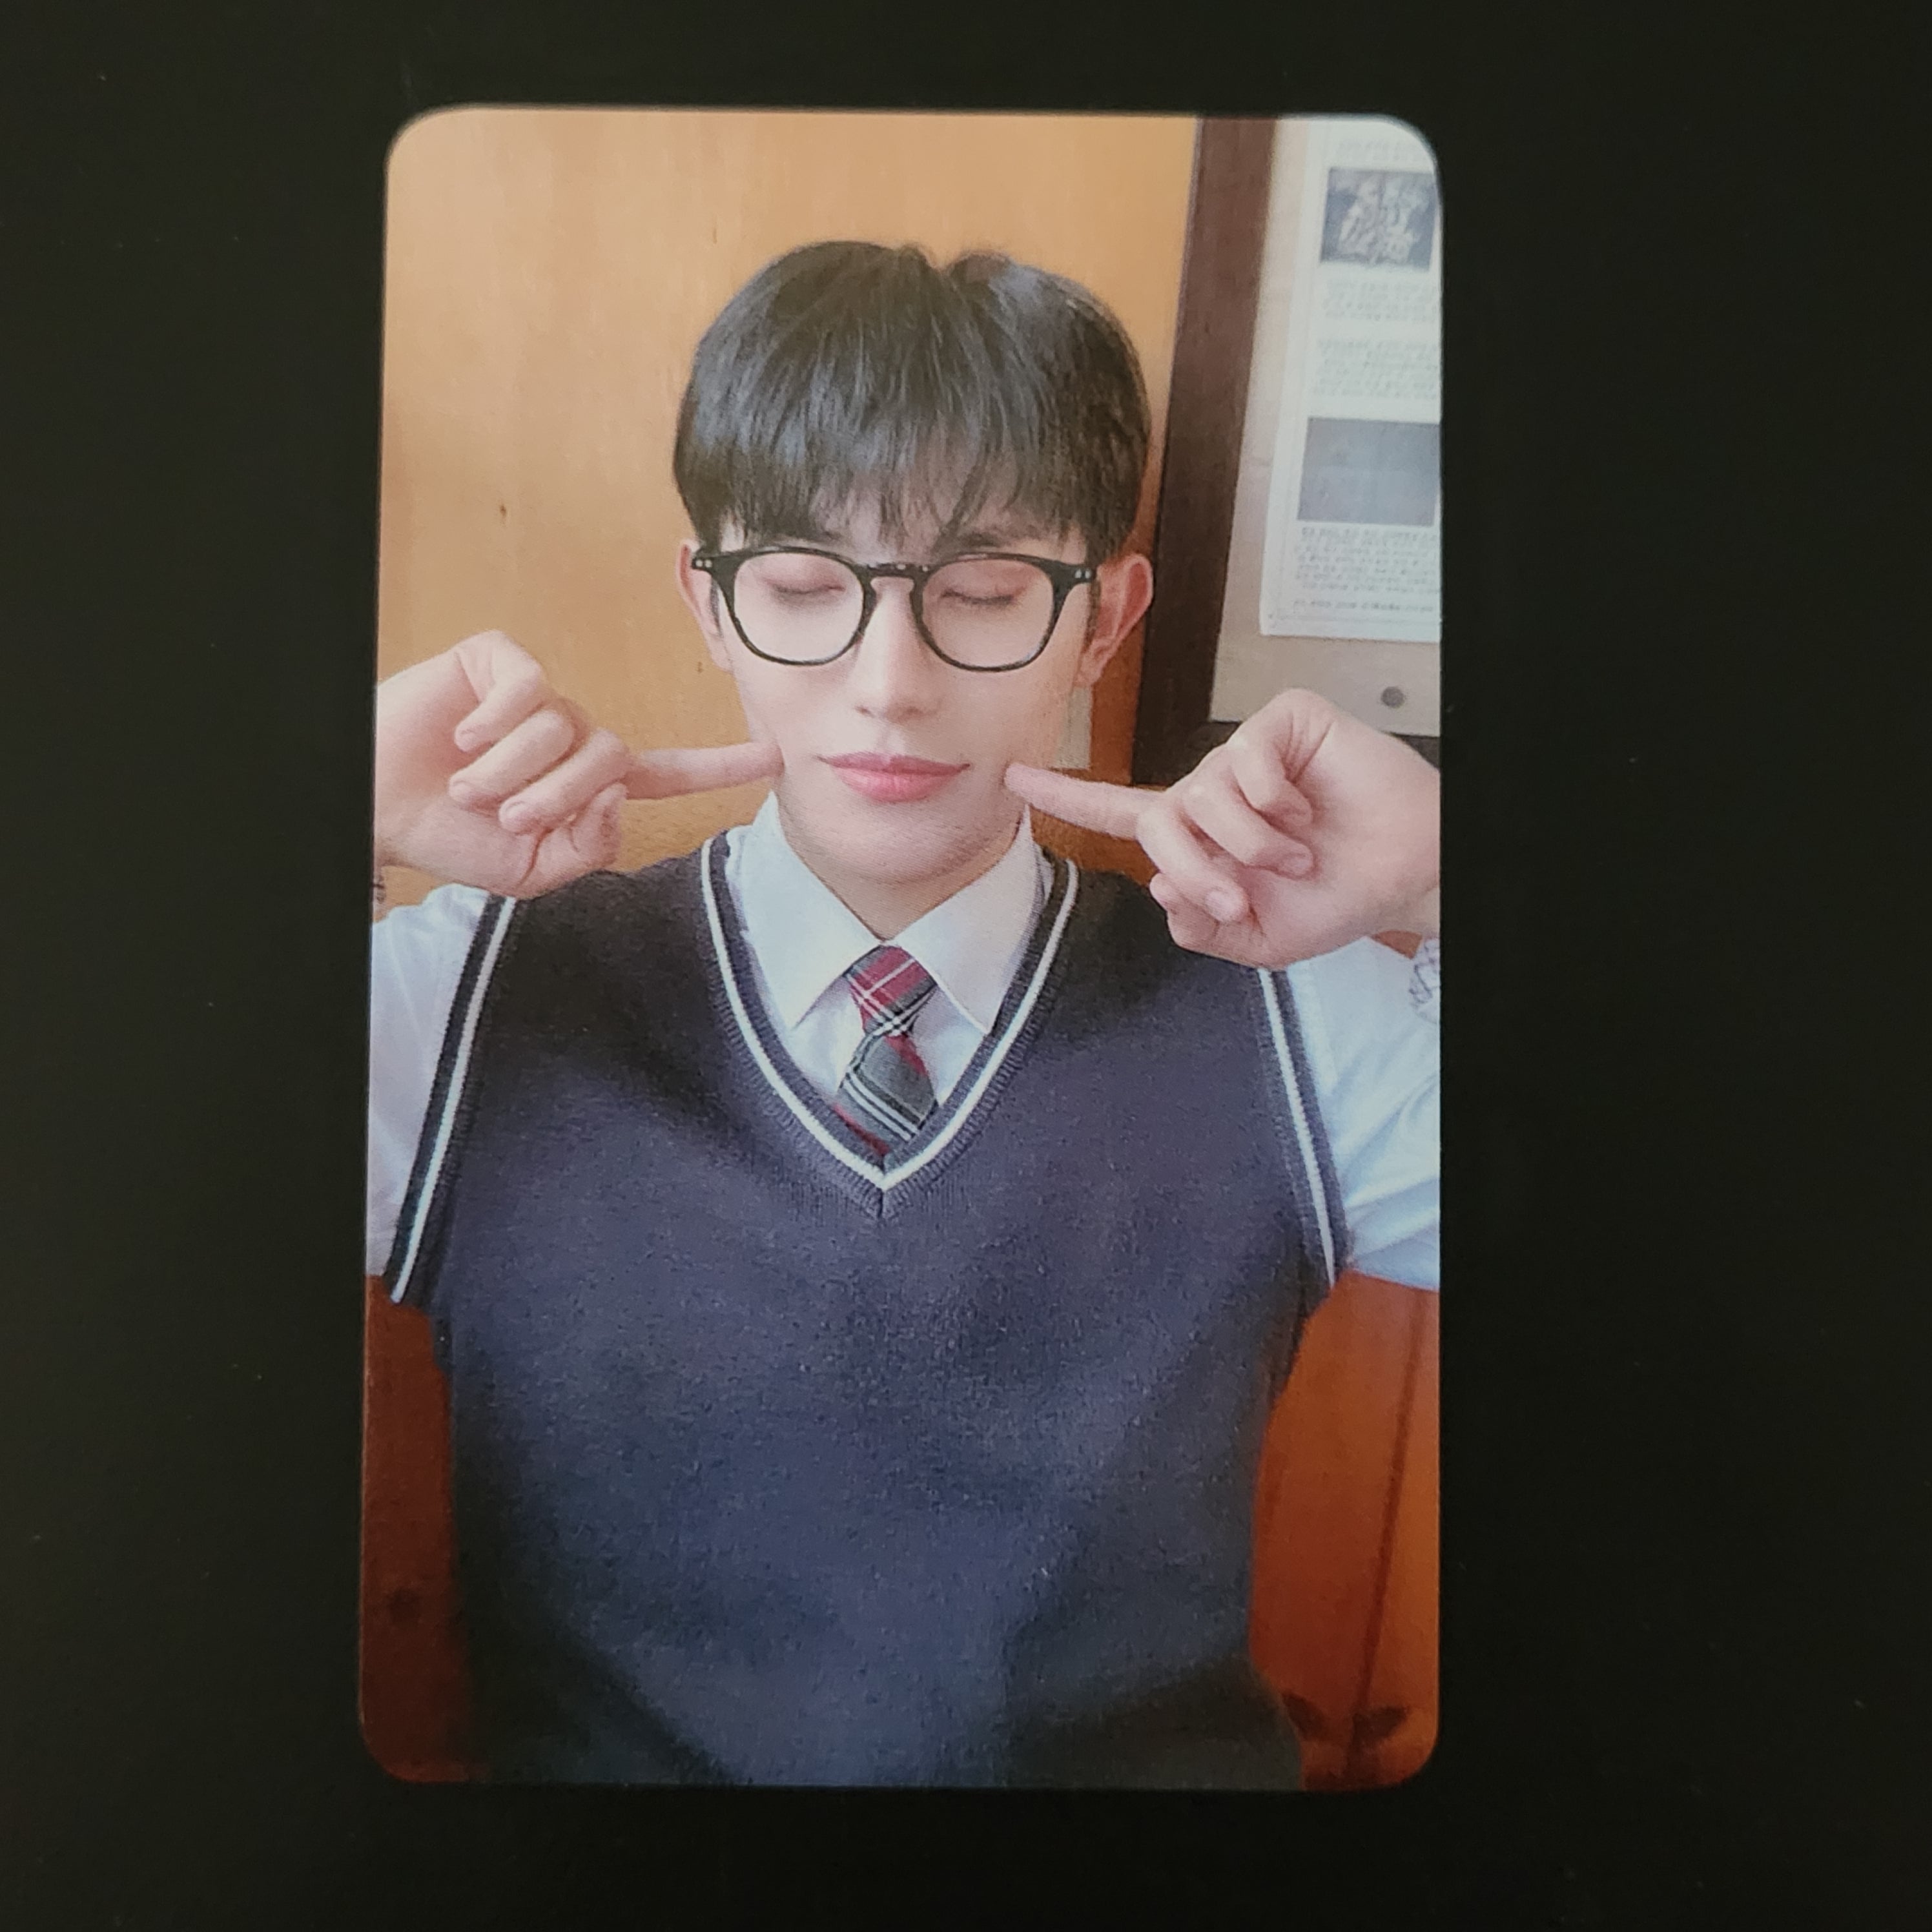 OnlyOneOf [KB] Dear My Muse Photocards – Ktown Honey